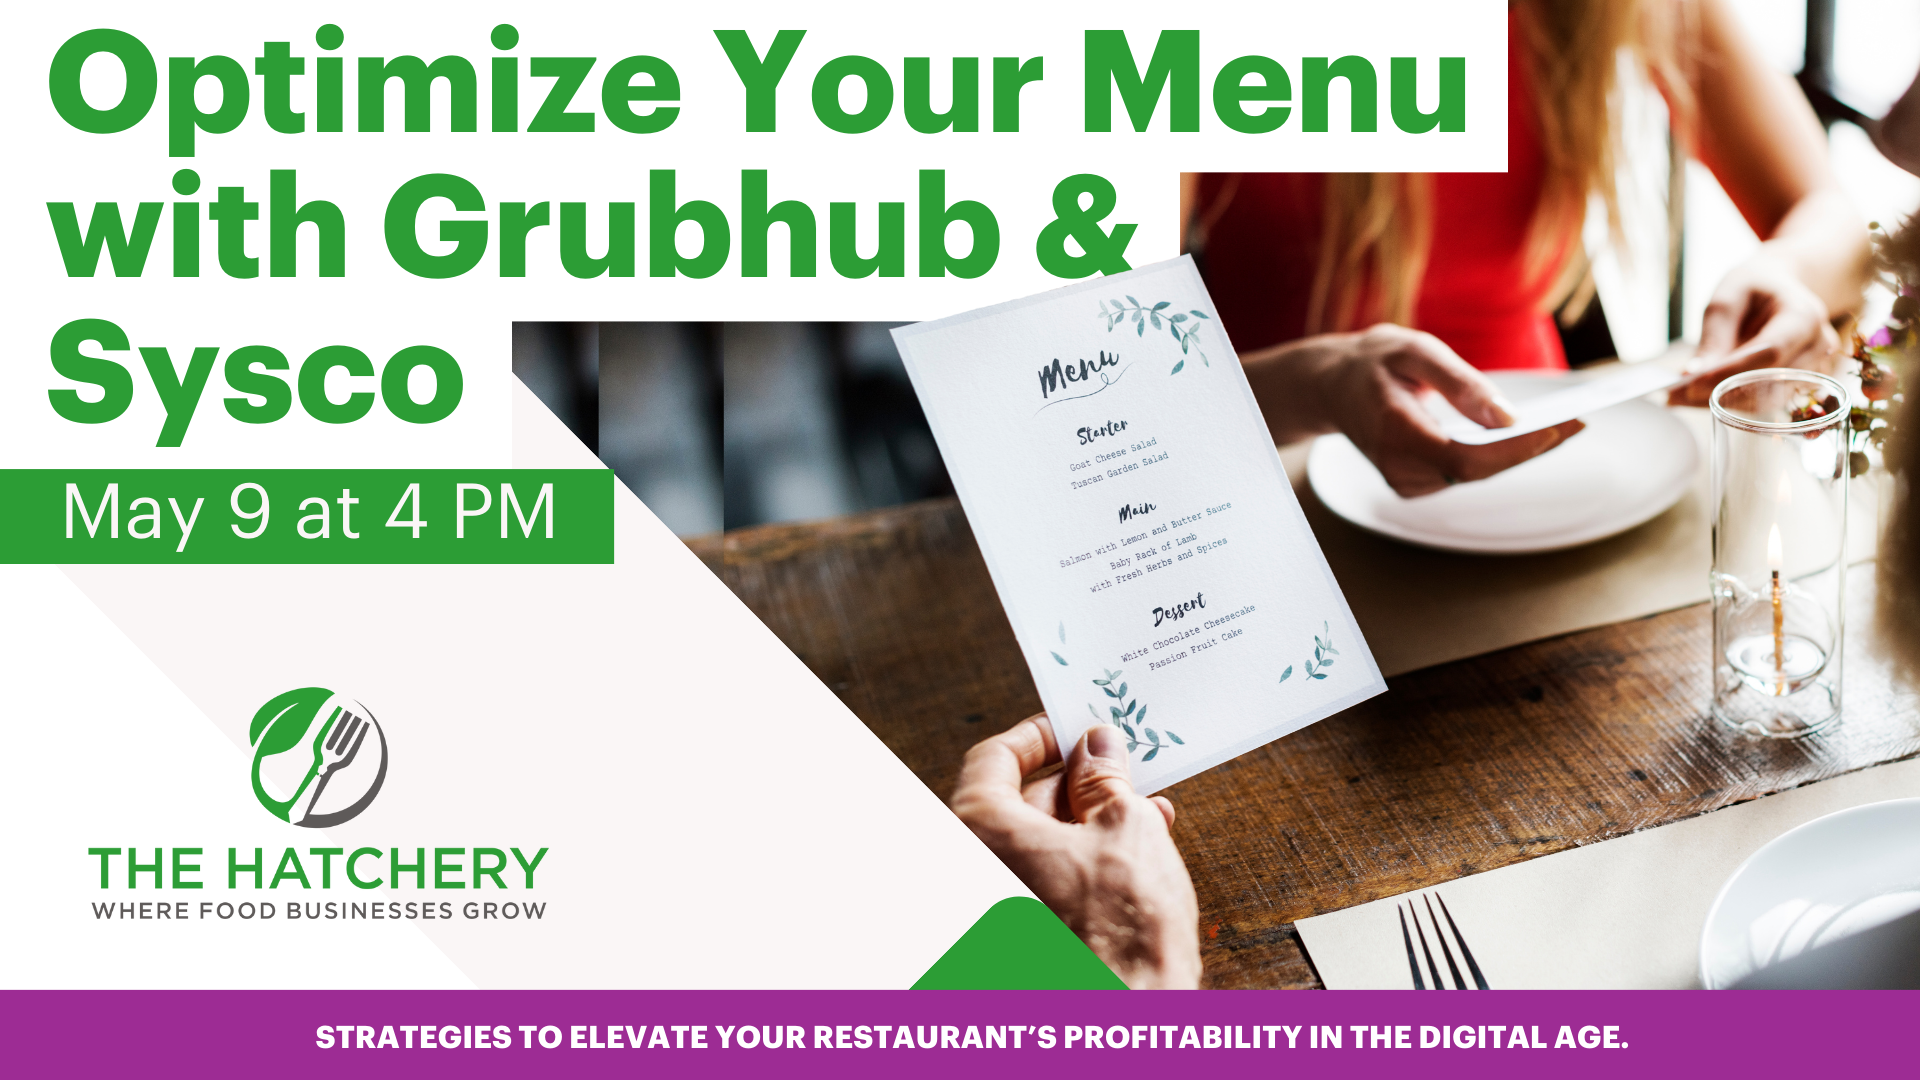 Optimize your menu with a class from grubhub and sysco in west side chicago